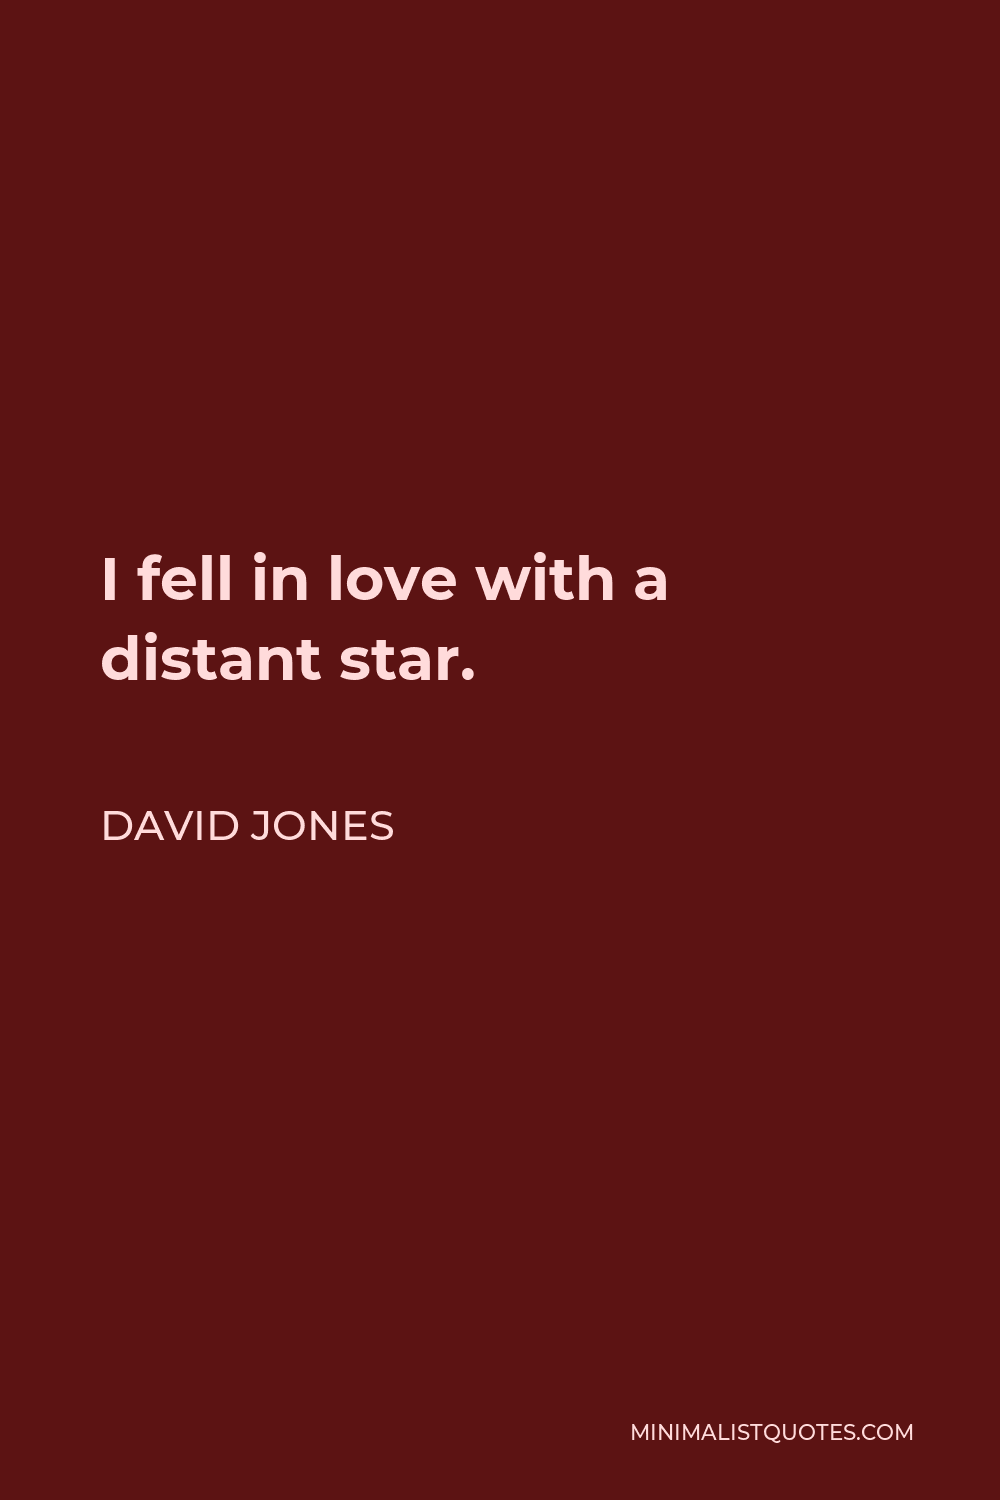 David Jones Quote - I fell in love with a distant star.